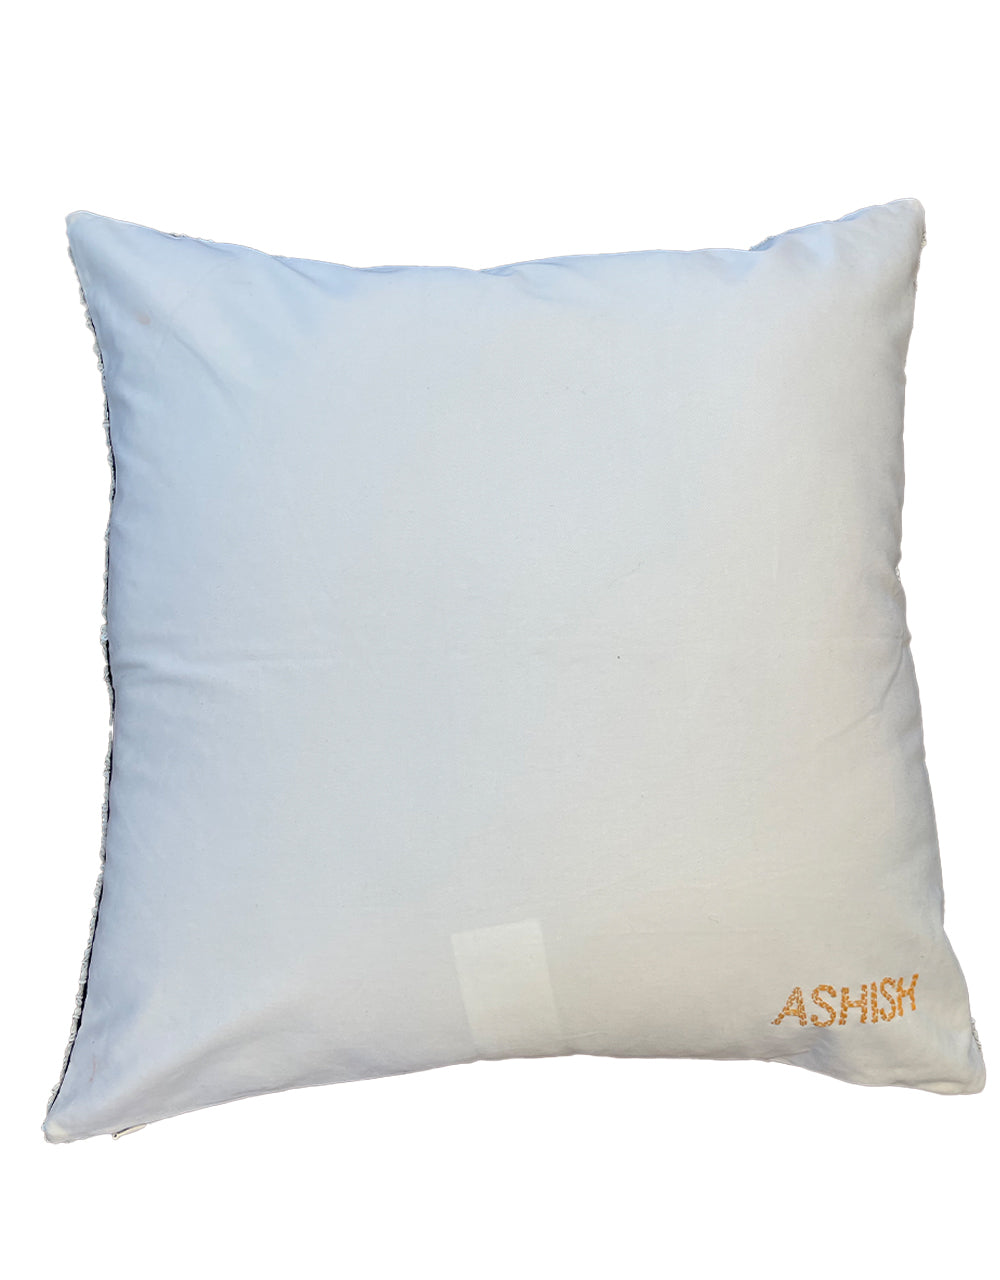 Sequin Accent Pillow - White